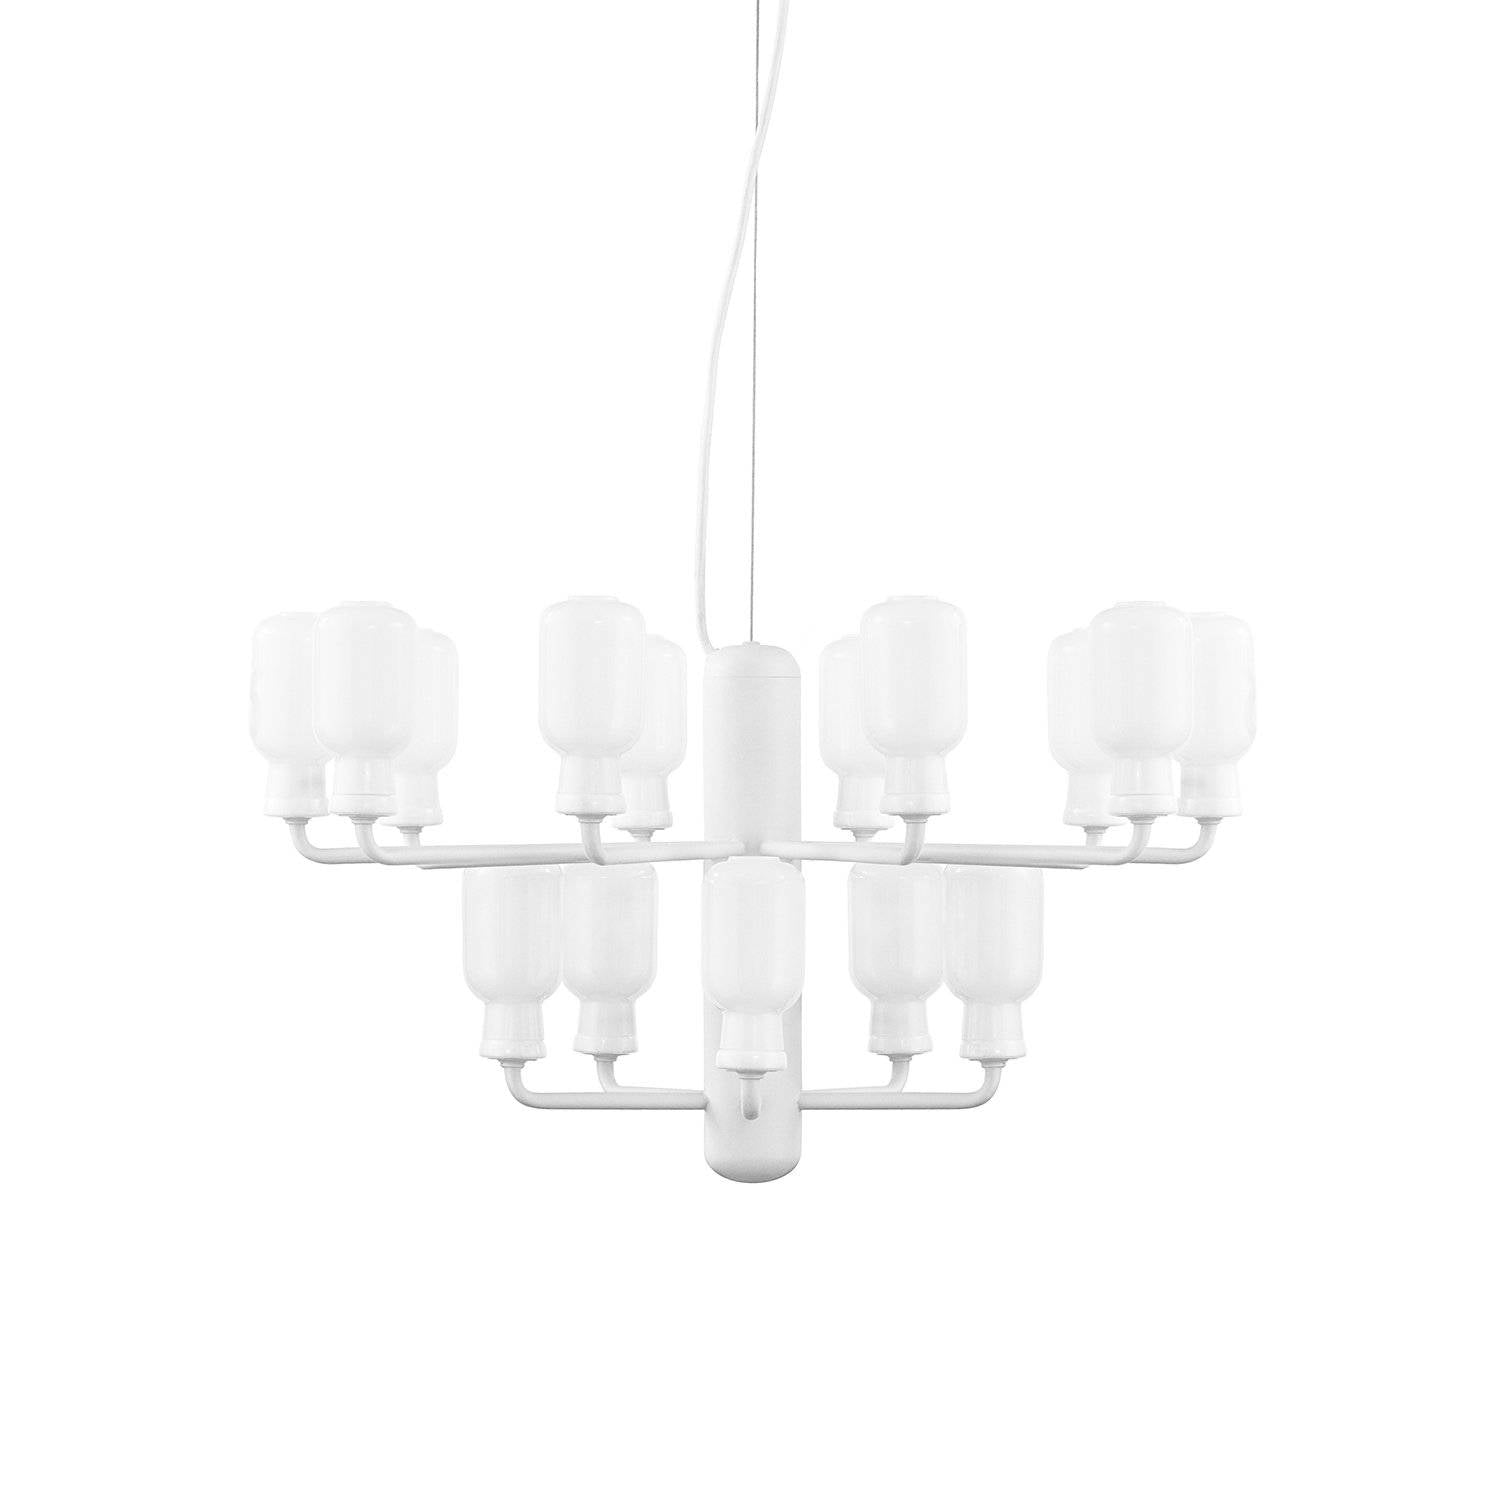 Amp Chandelier: Small - 24.6